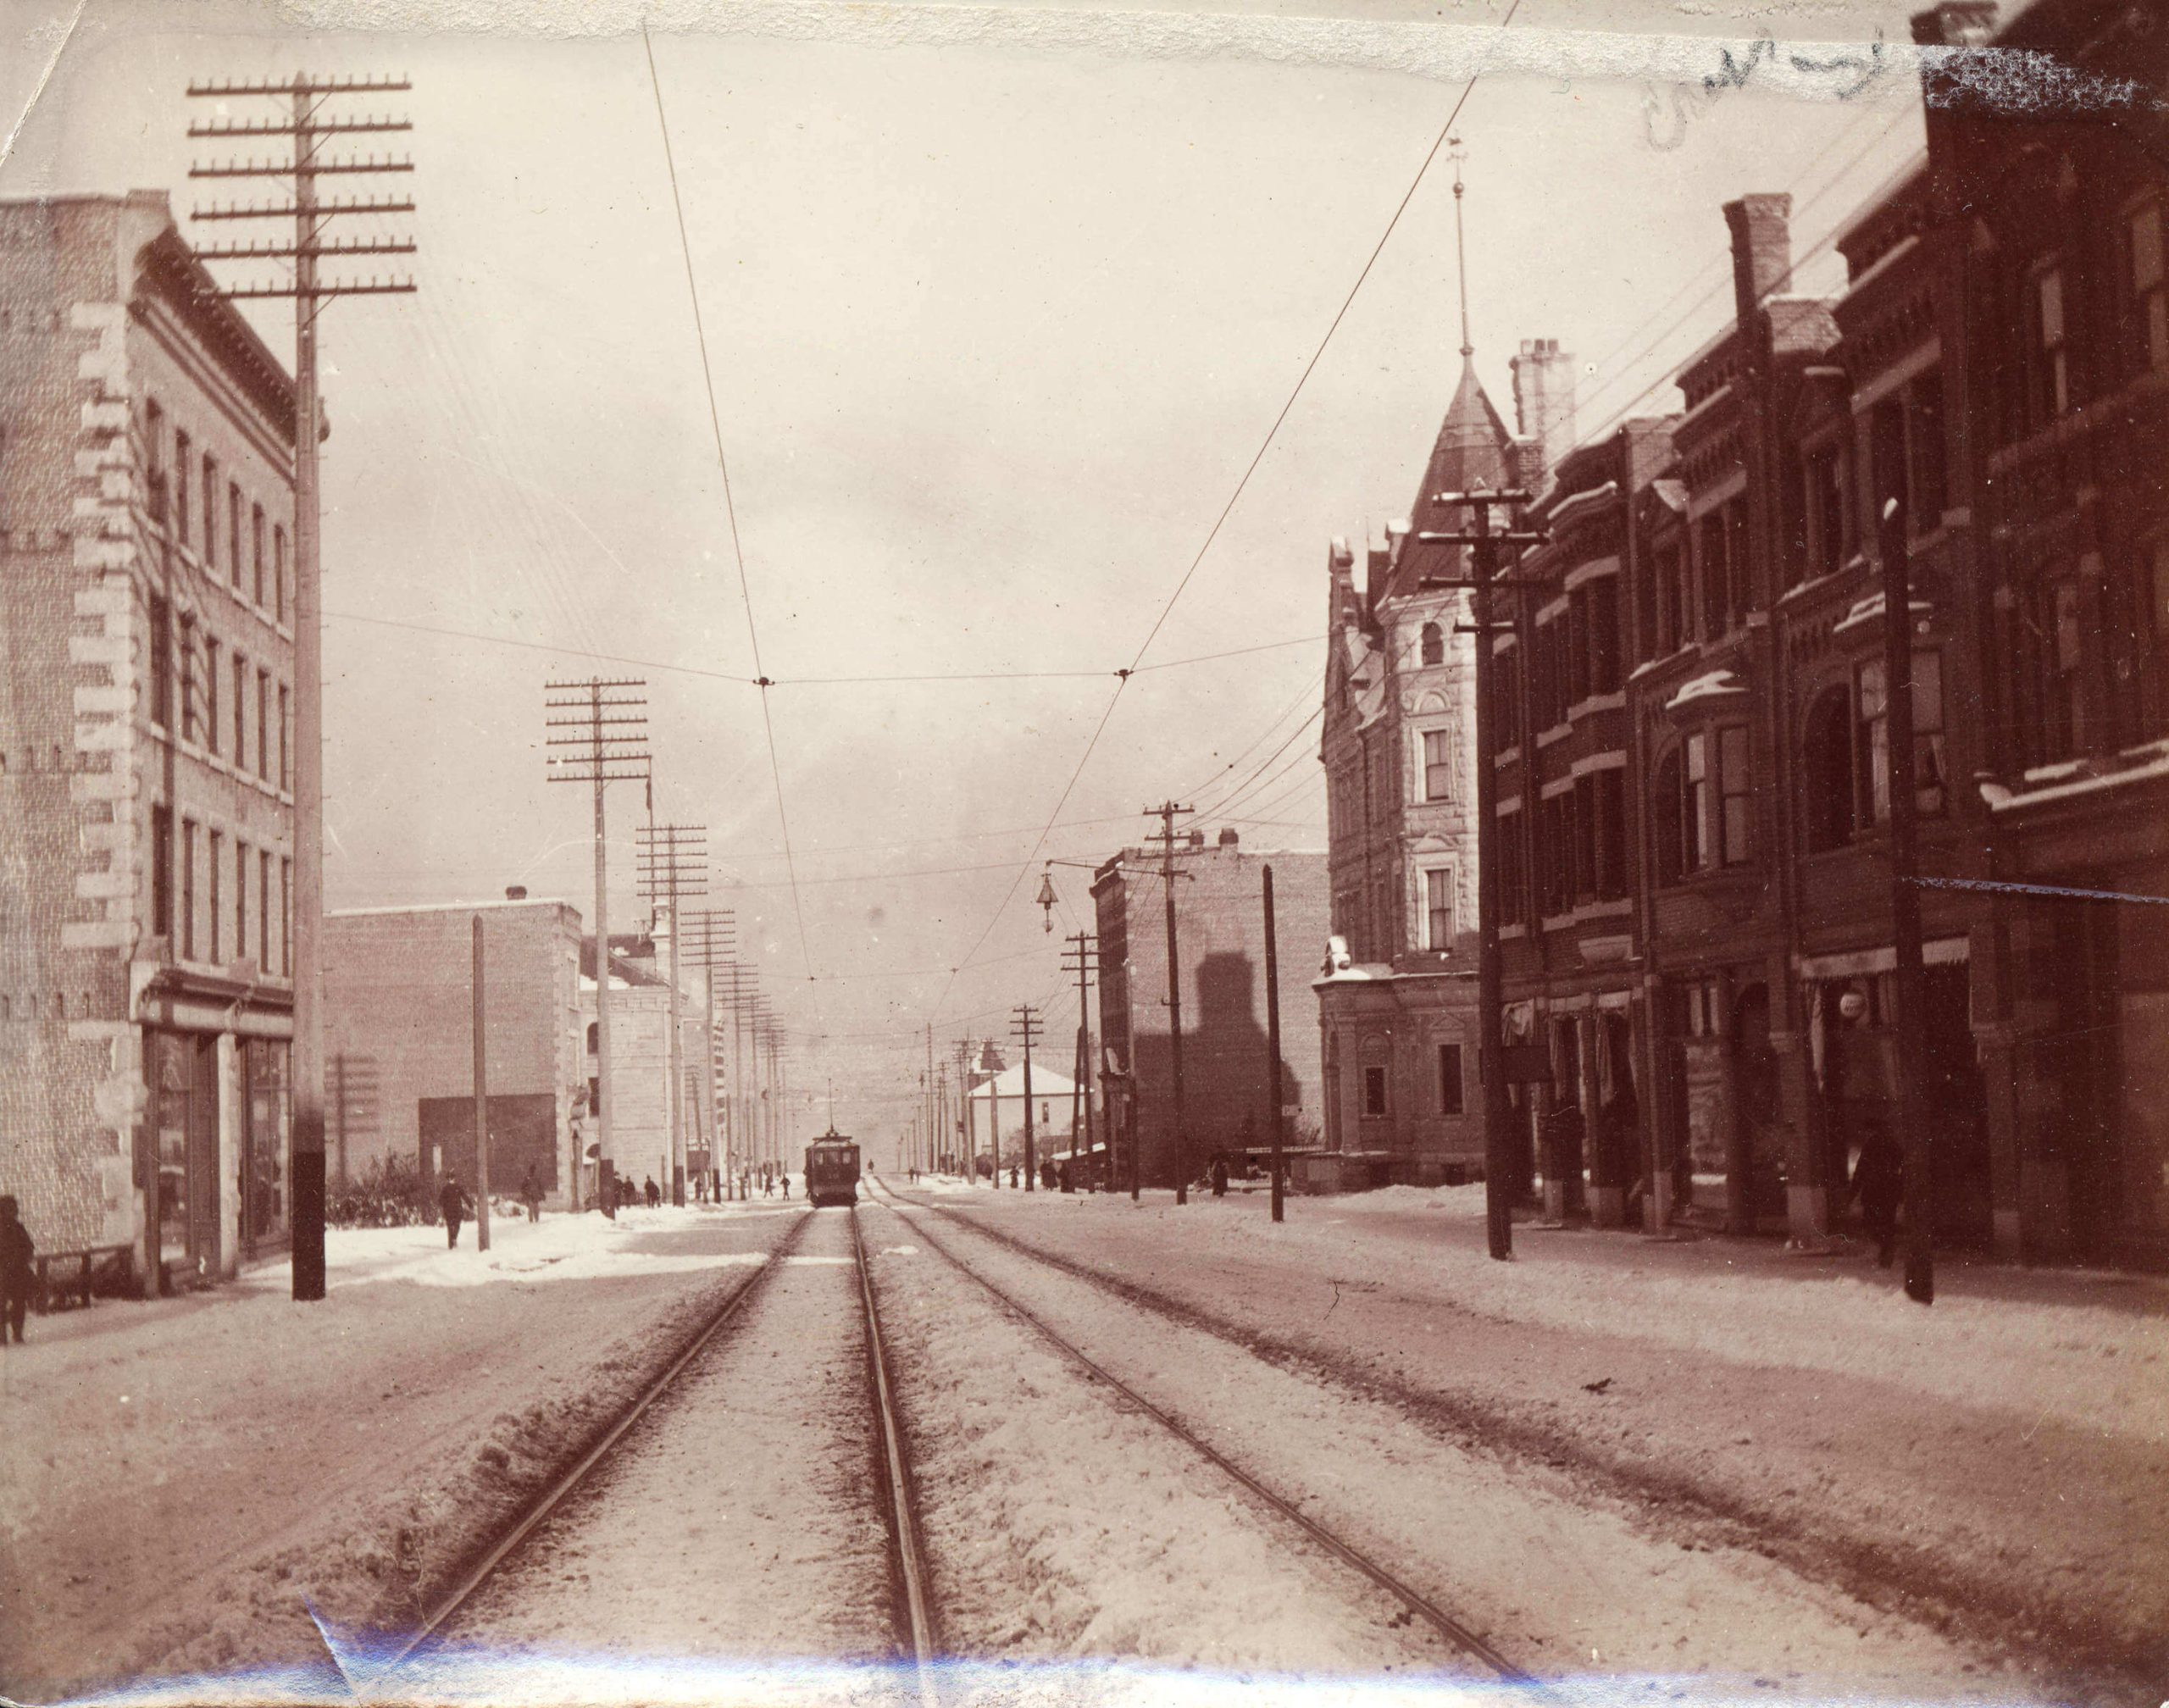 1900 - Looking north from the 600 Block of Granville Street